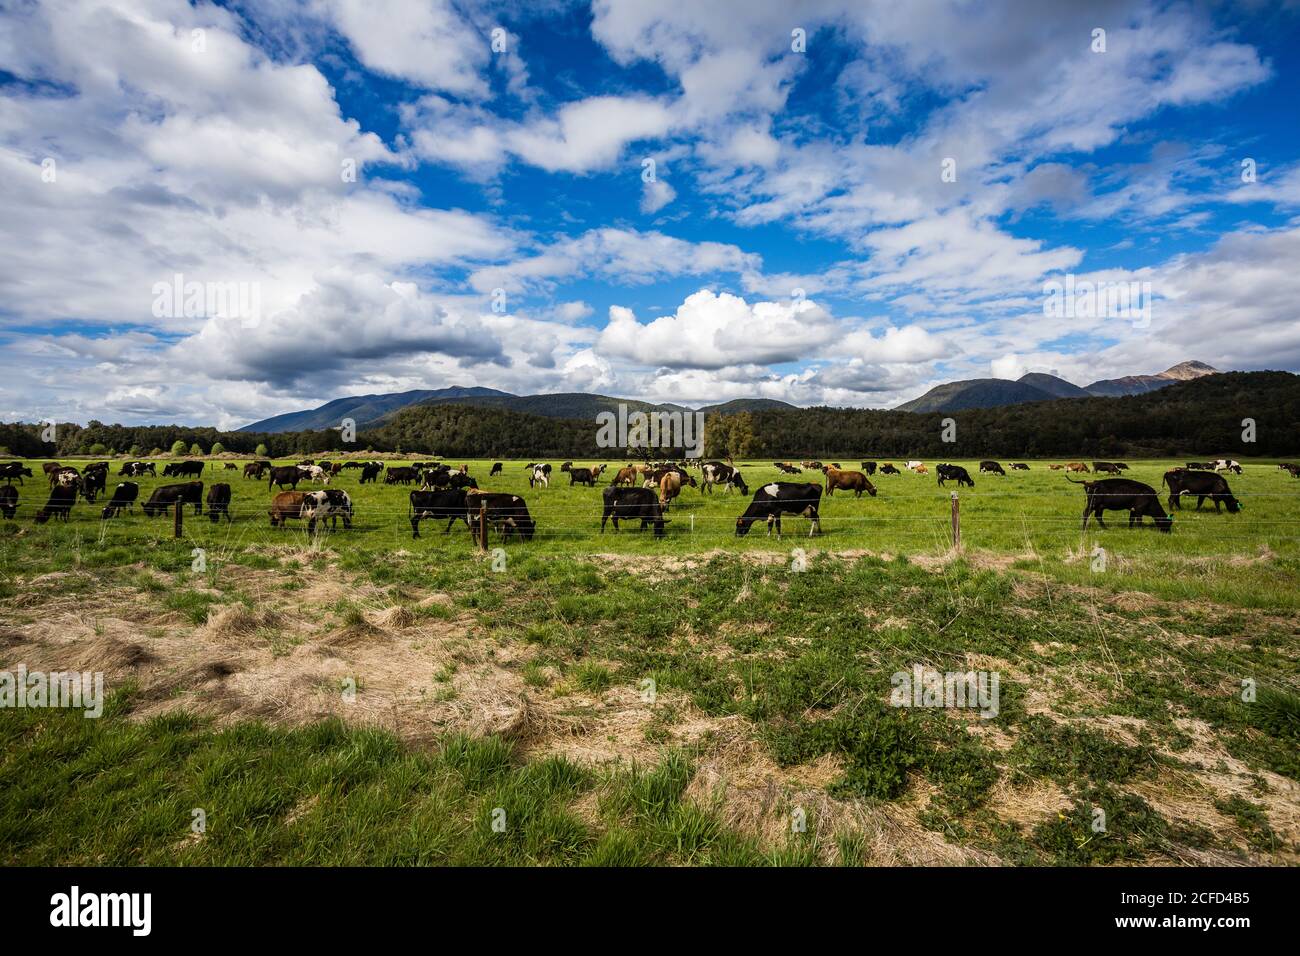 Cow meadow in front of mountain landscape, South Island New Zealand Stock Photo